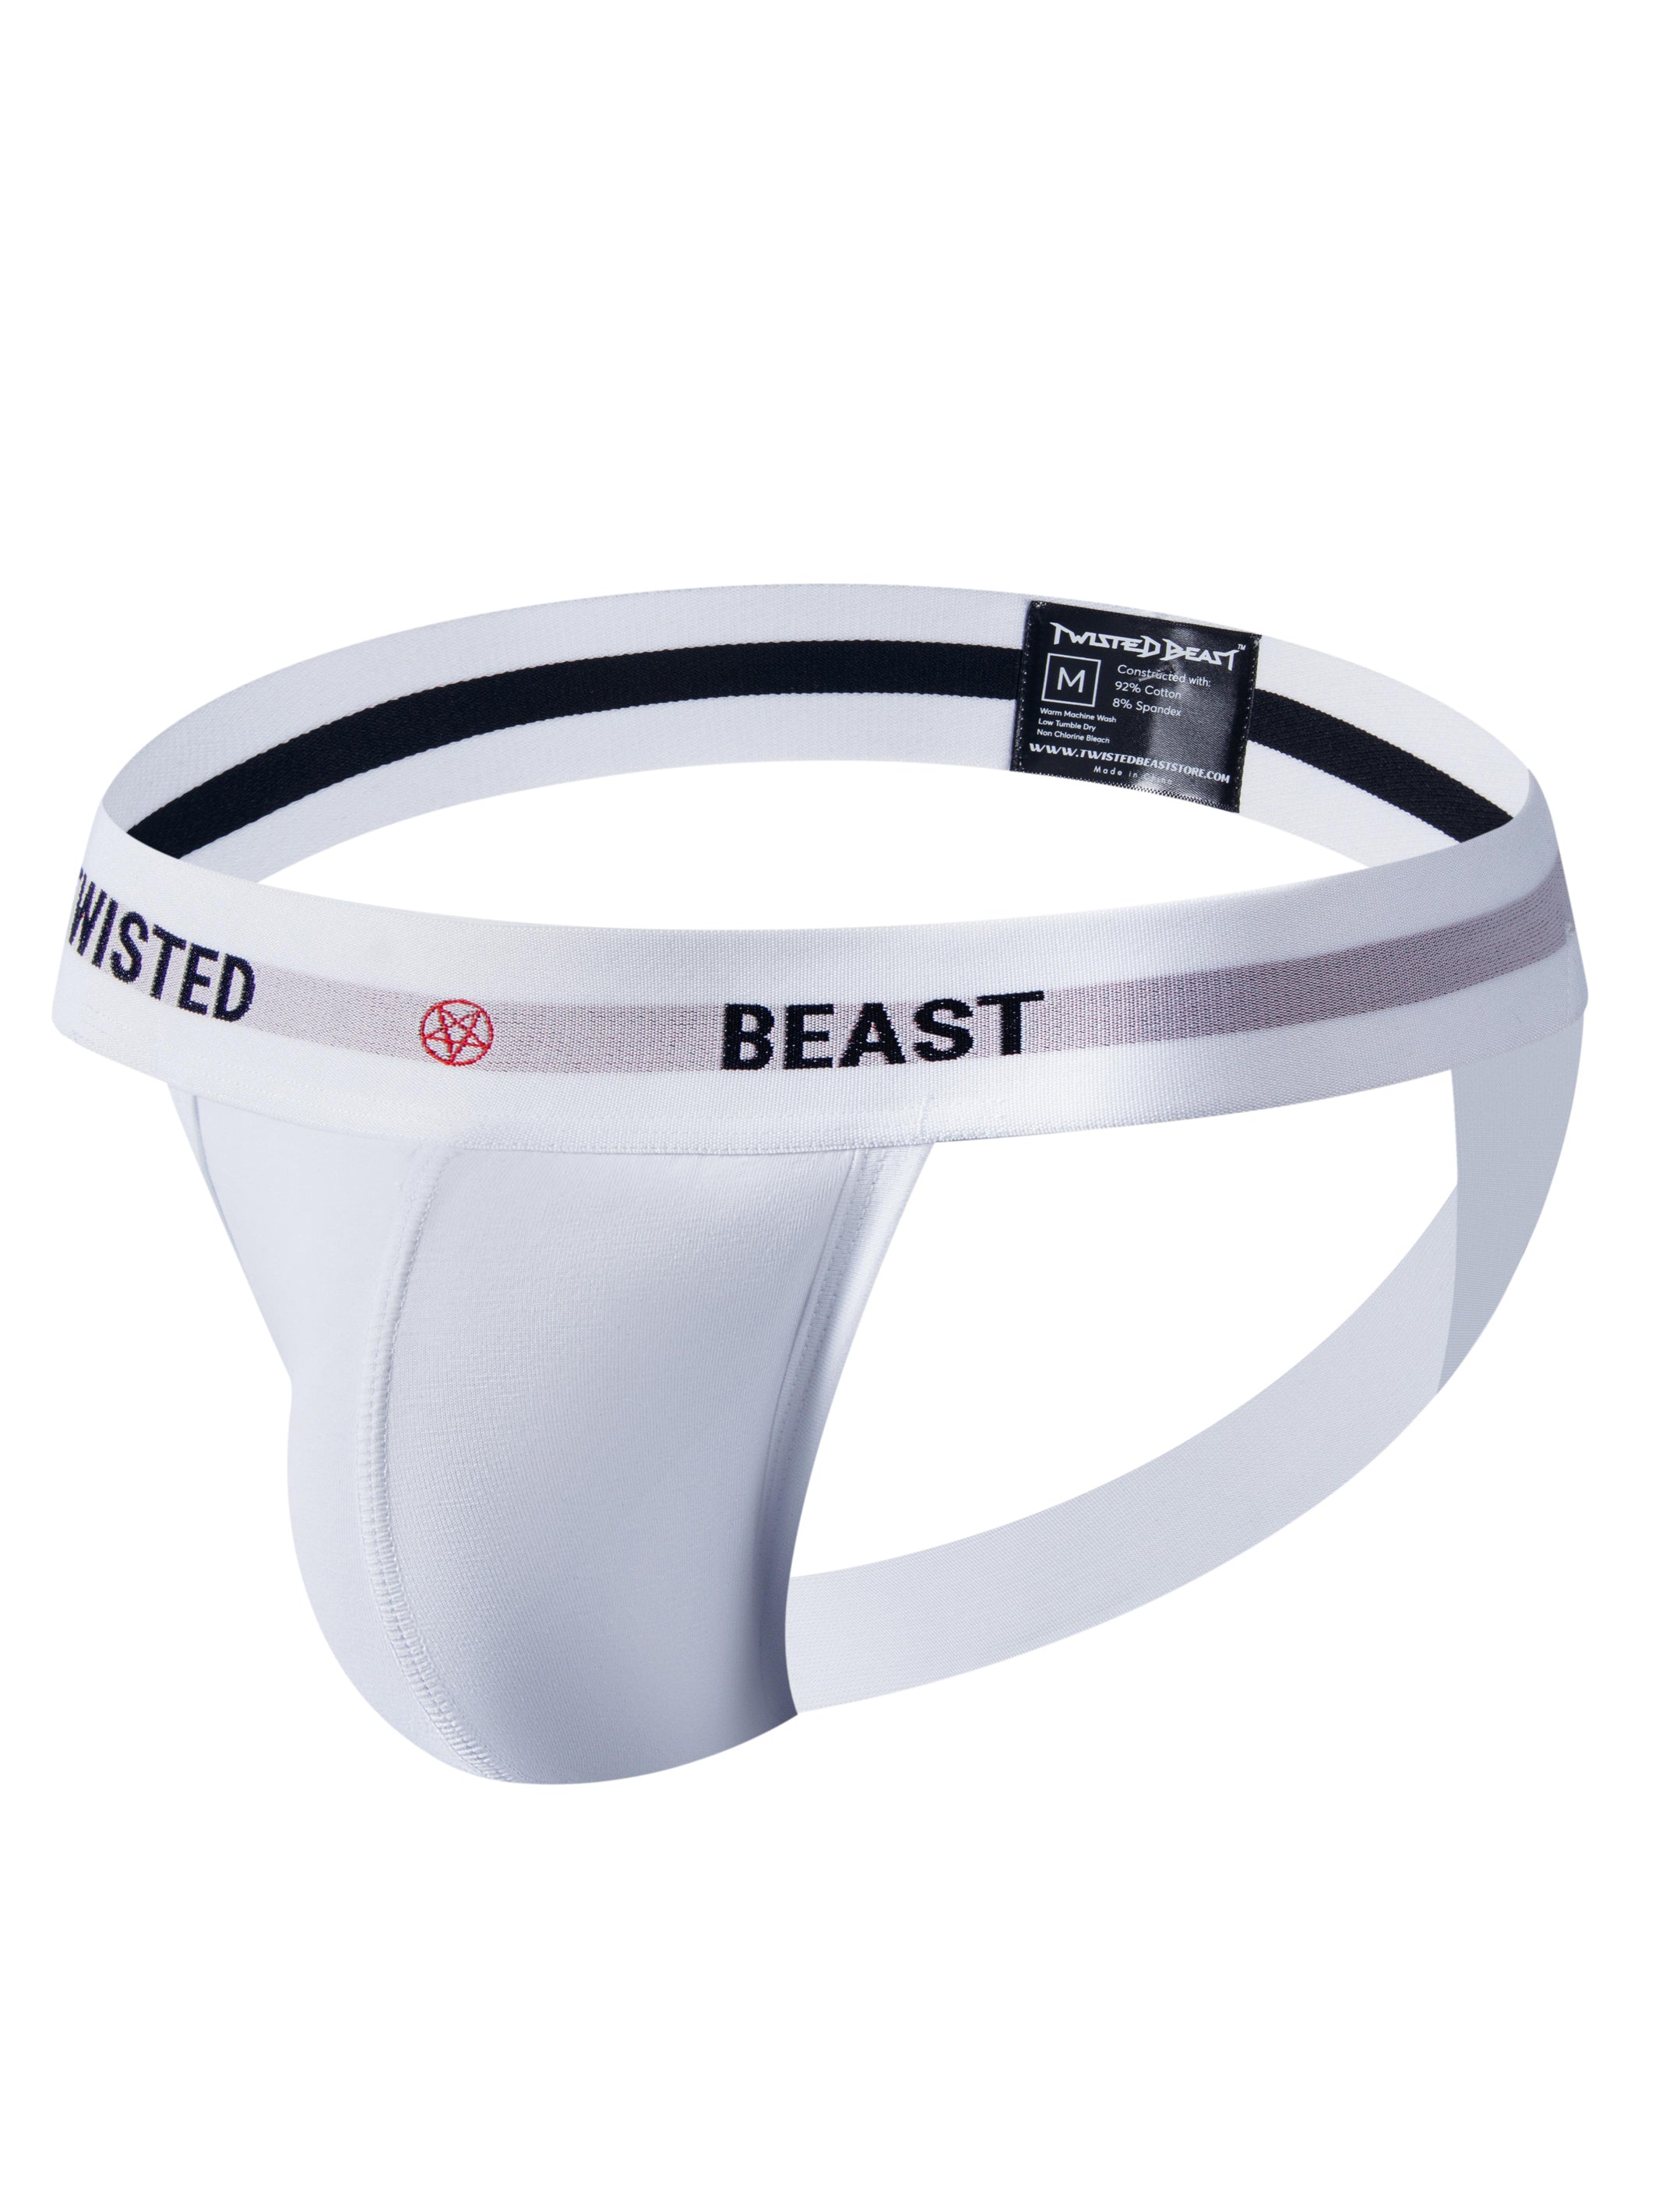 A side product photo of a white Insignia Jock by Twisted Beast.